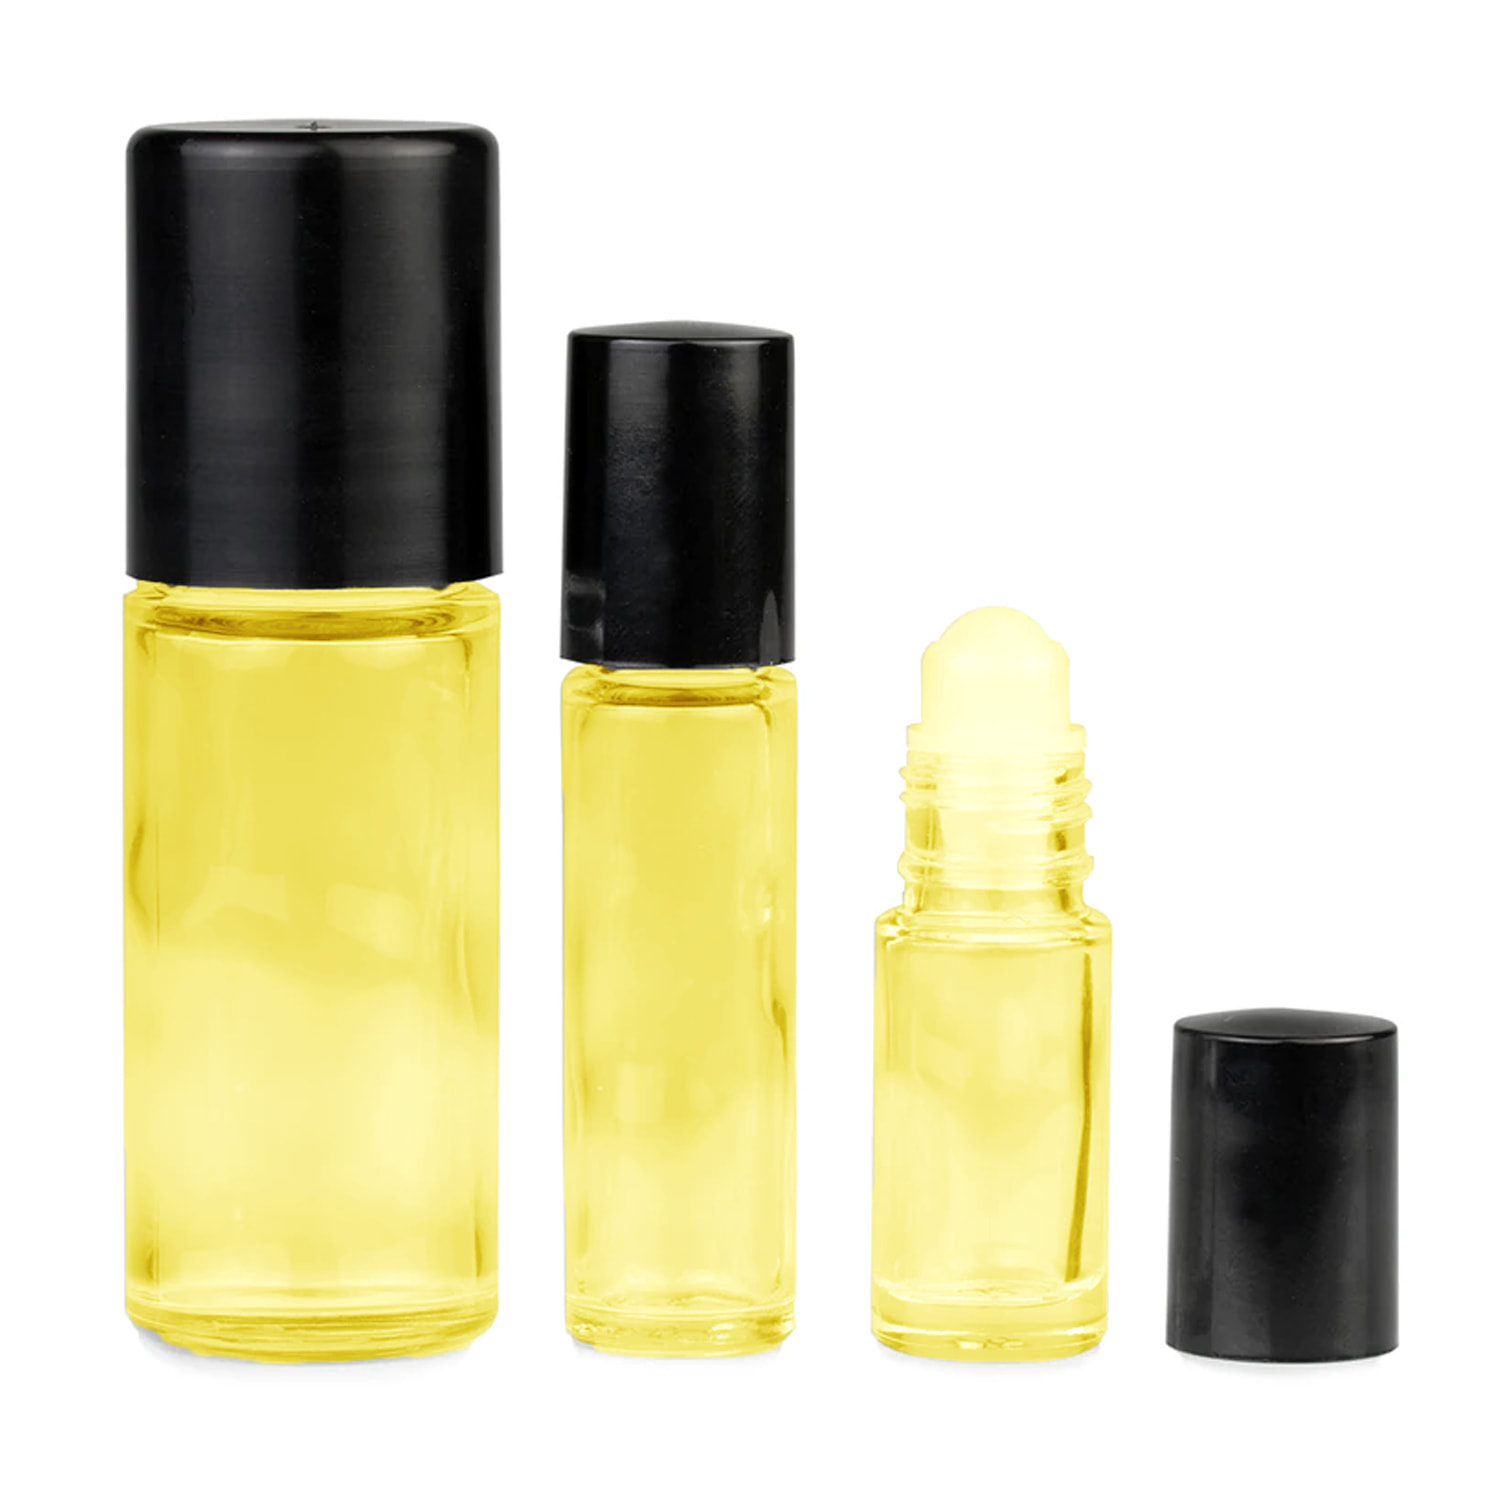 Why Perfume Body Oils Are a Must-Have Fragrance Collection?